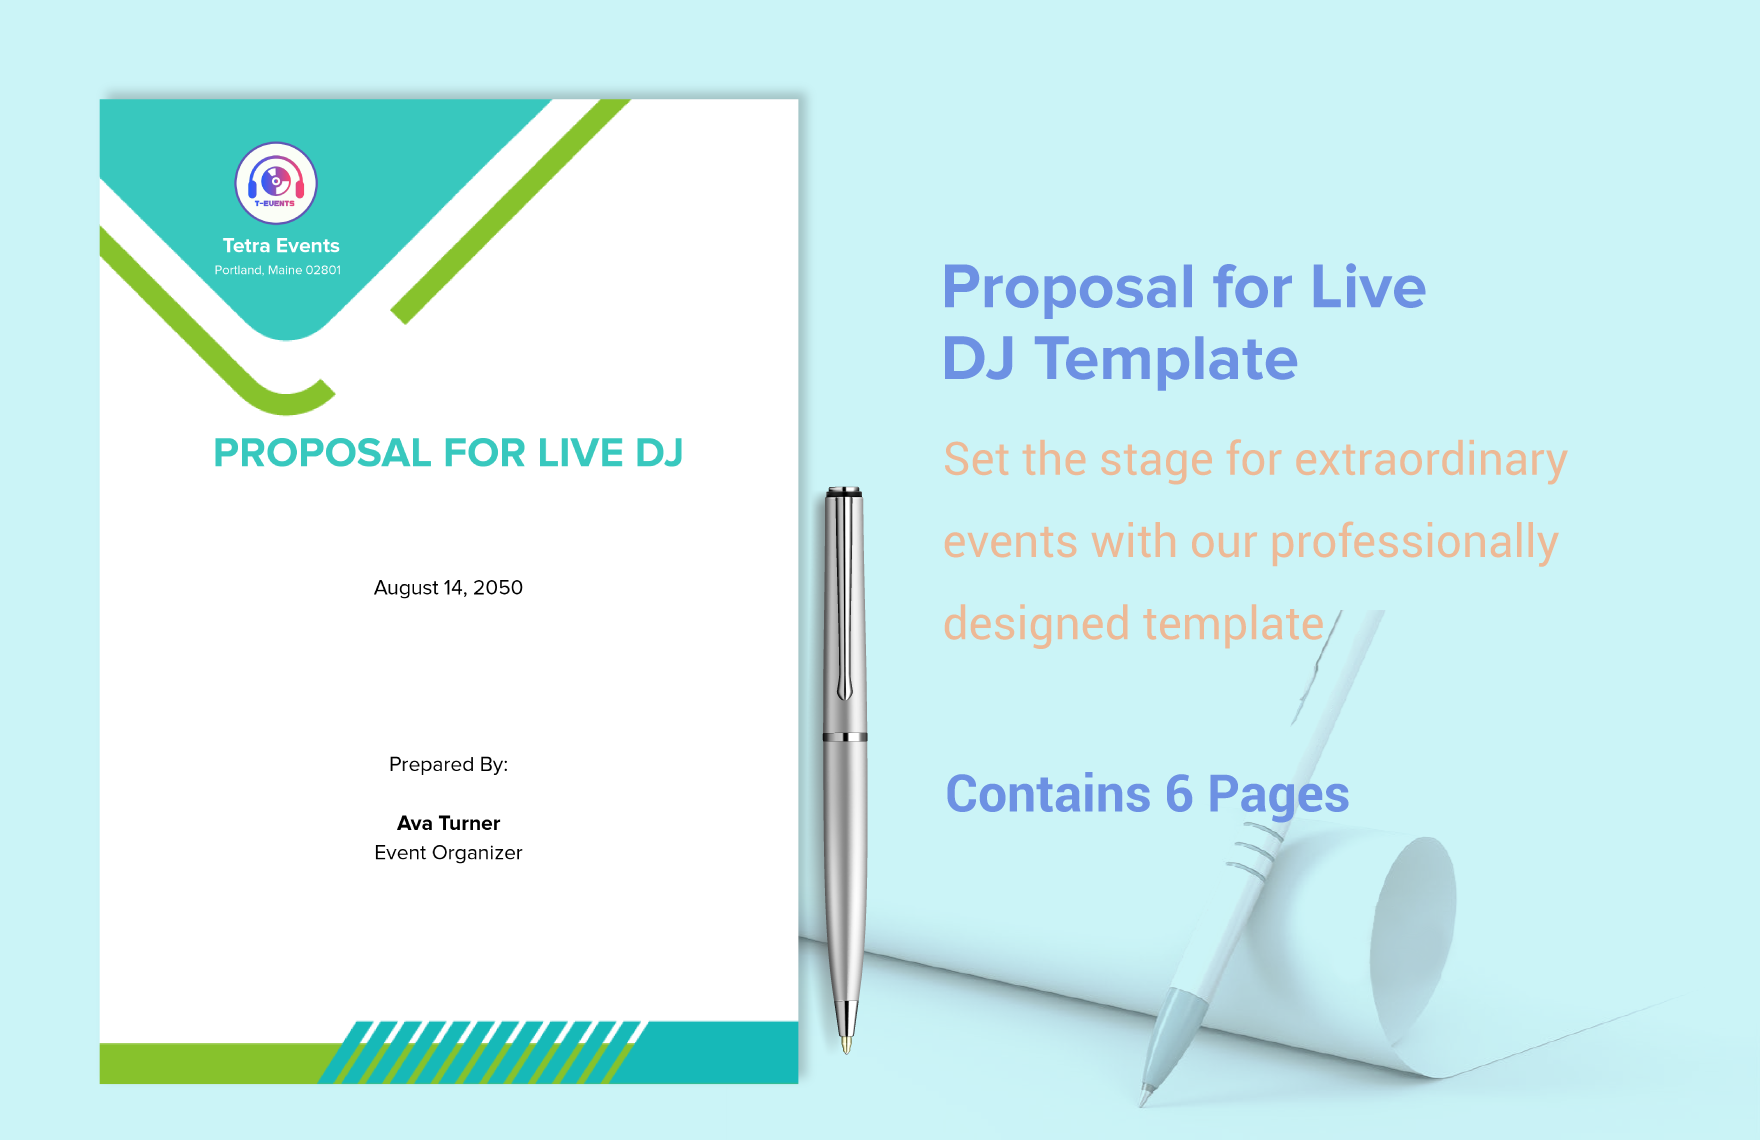 Proposal for Live DJ Template